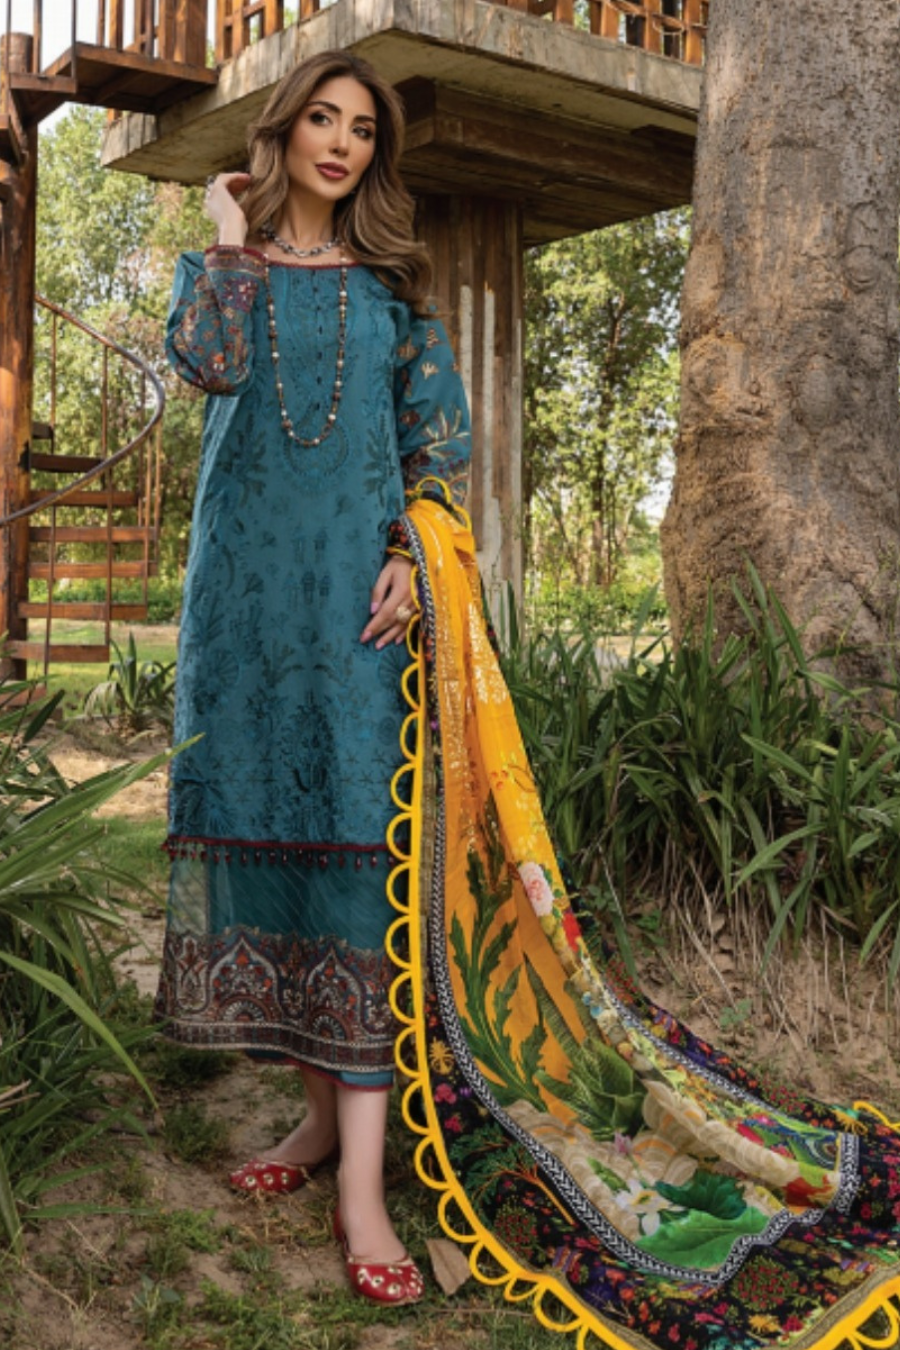 BLUE BELL DULL | 06 | Arzoo | Humdum